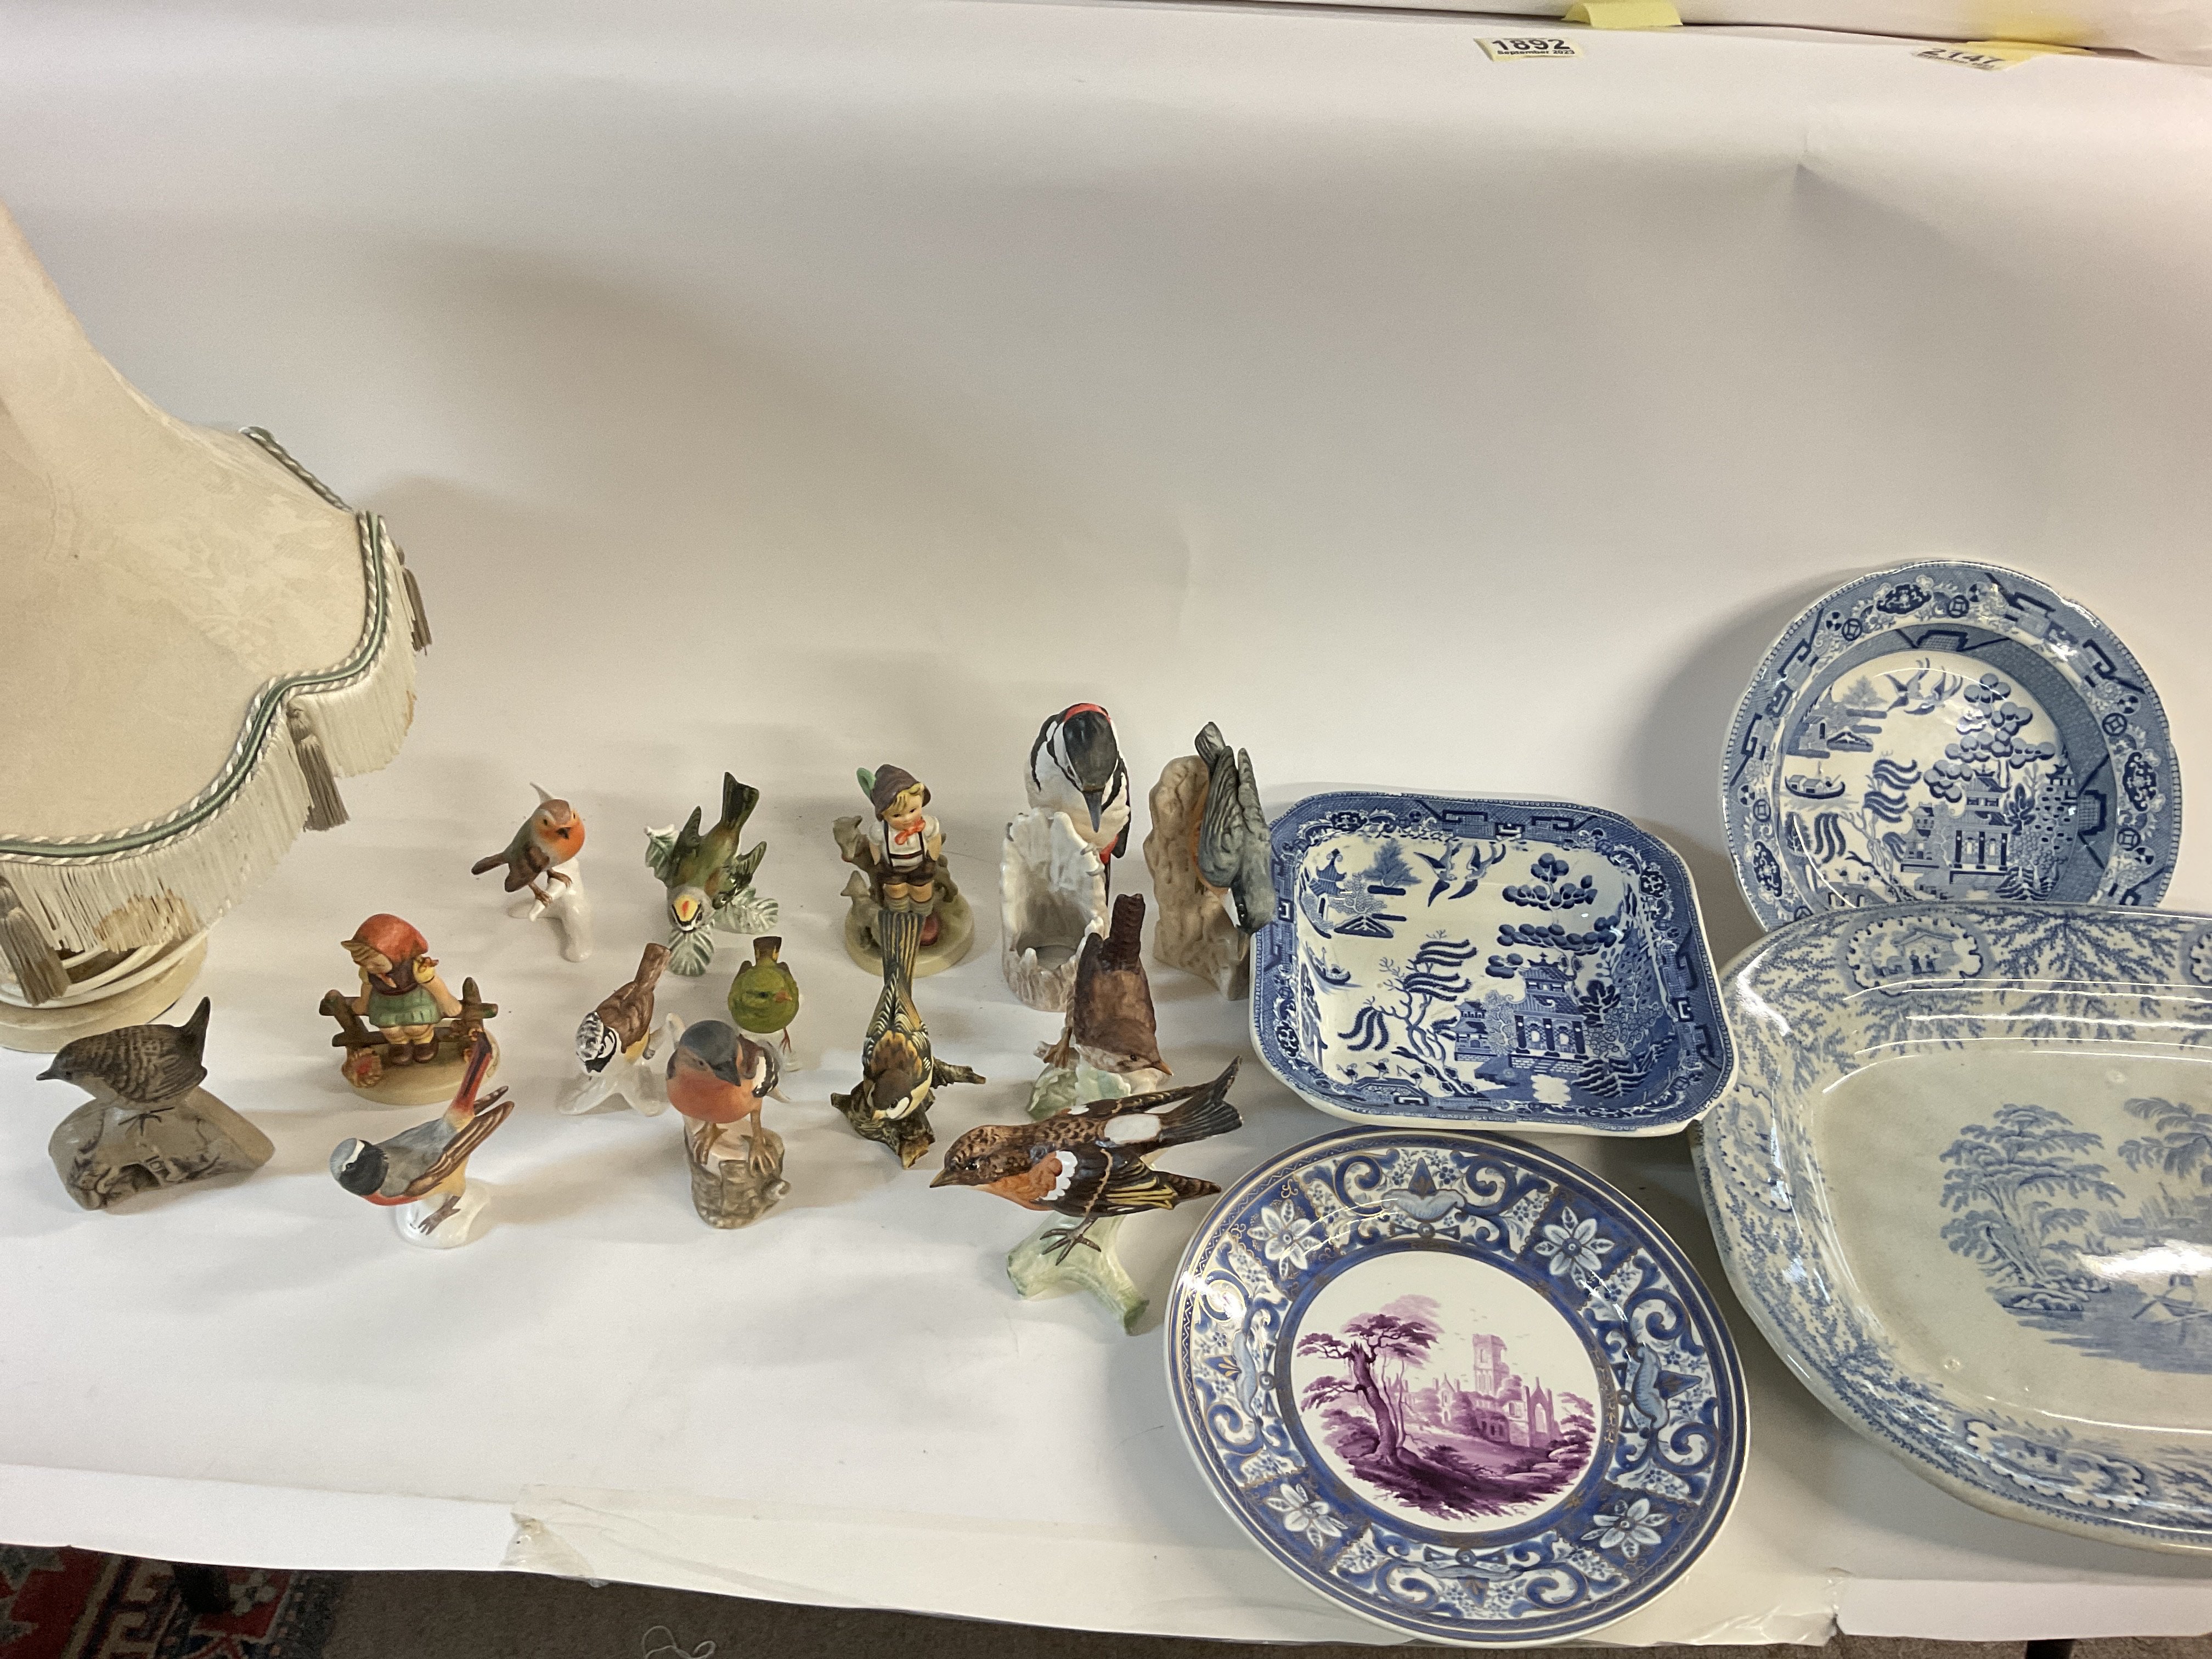 Collective lot of ceramics including Goebel figures a lamp which shows signs of extensive repair and